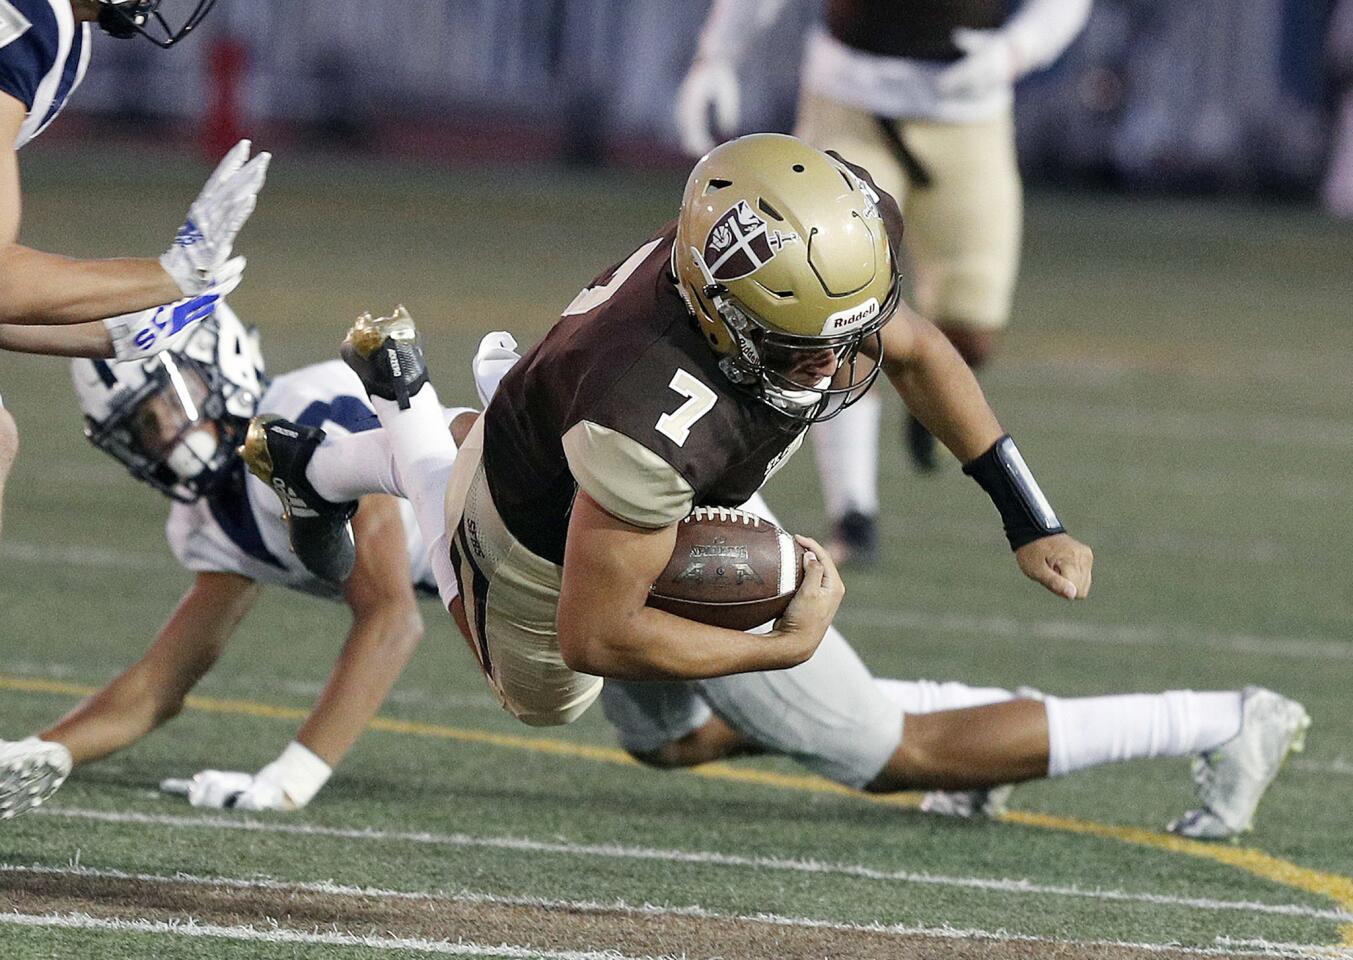 St. Francis' quarterback Darius Perrantes keeps the ball and runs for a lot of yards against Saugus in a non-league football game at St. Francis High School on Friday, September 14, 2018.